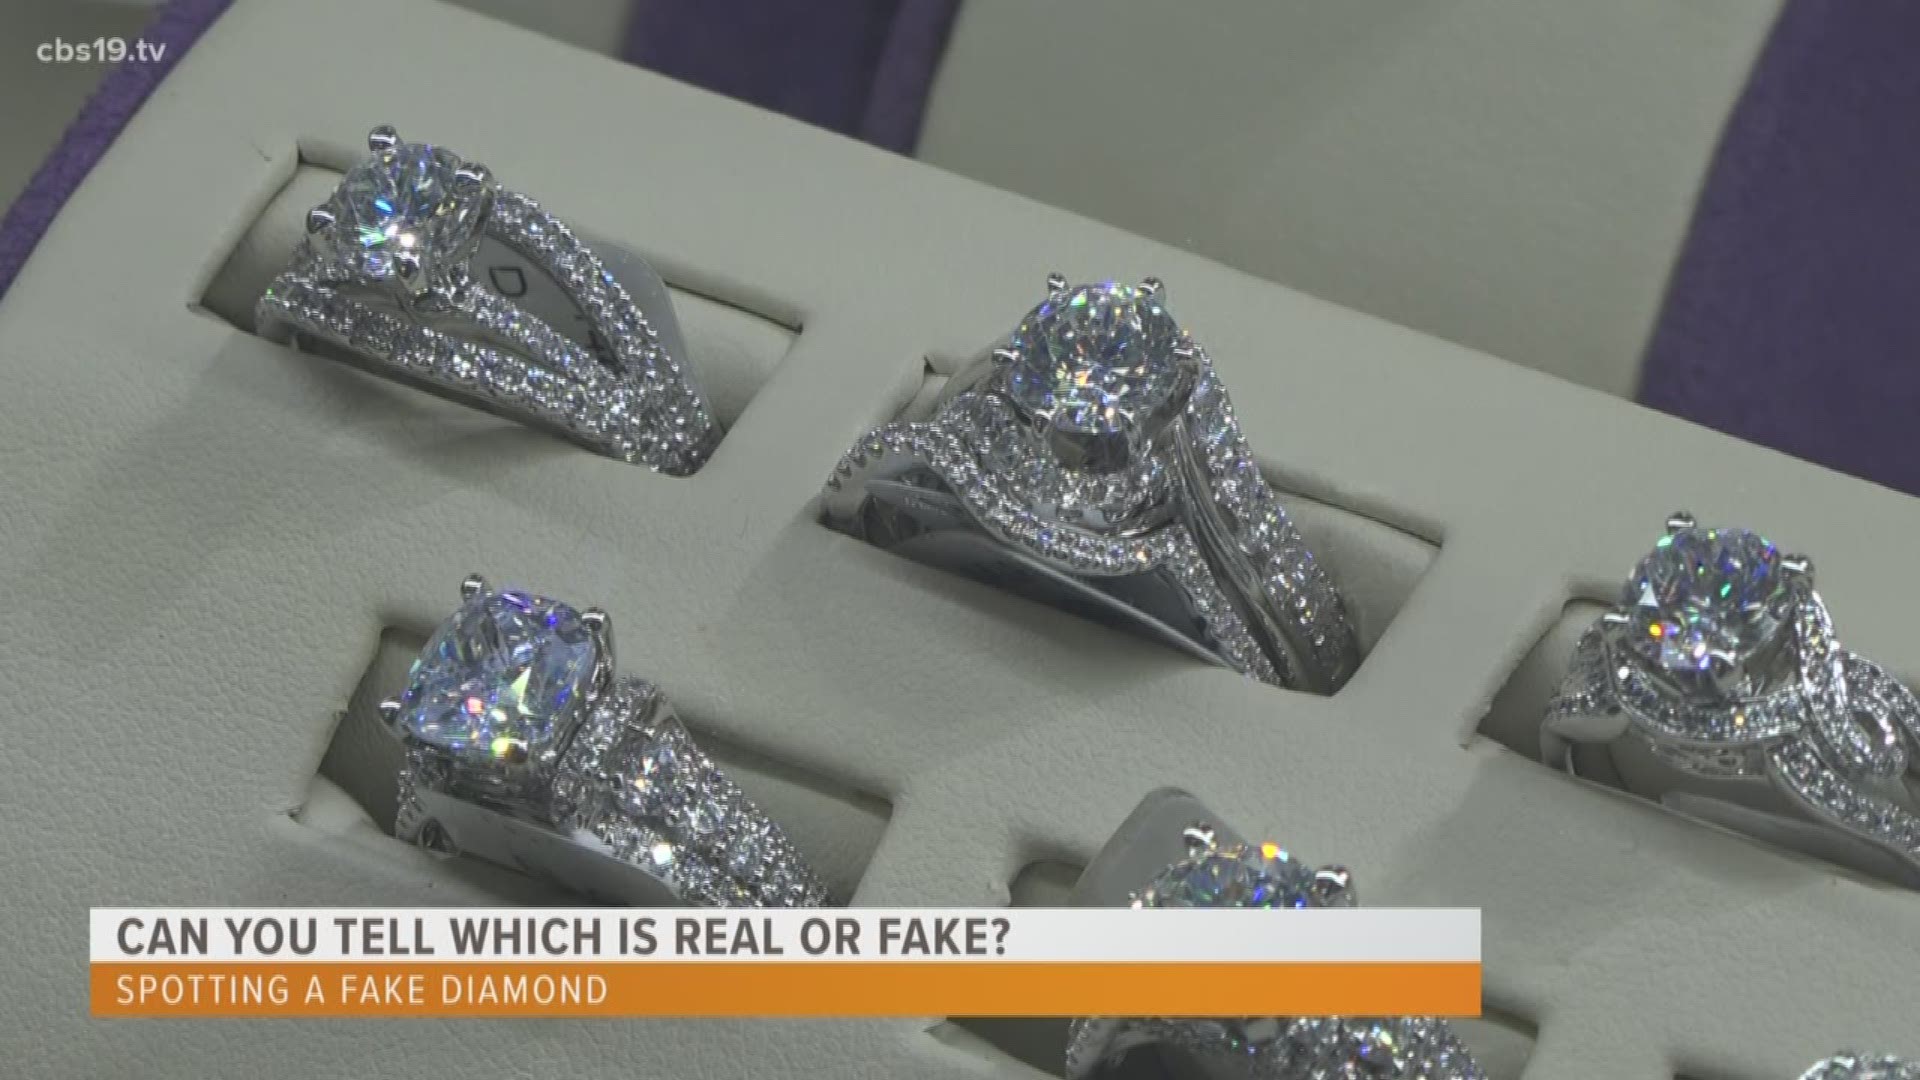 Many people will spend billions of dollars on jewelry, according to the National Retail Federation. Diamonds will be one of the most popular purchases. One of the ways to tell if you're getting a real or fake diamond is to head to the professionals.